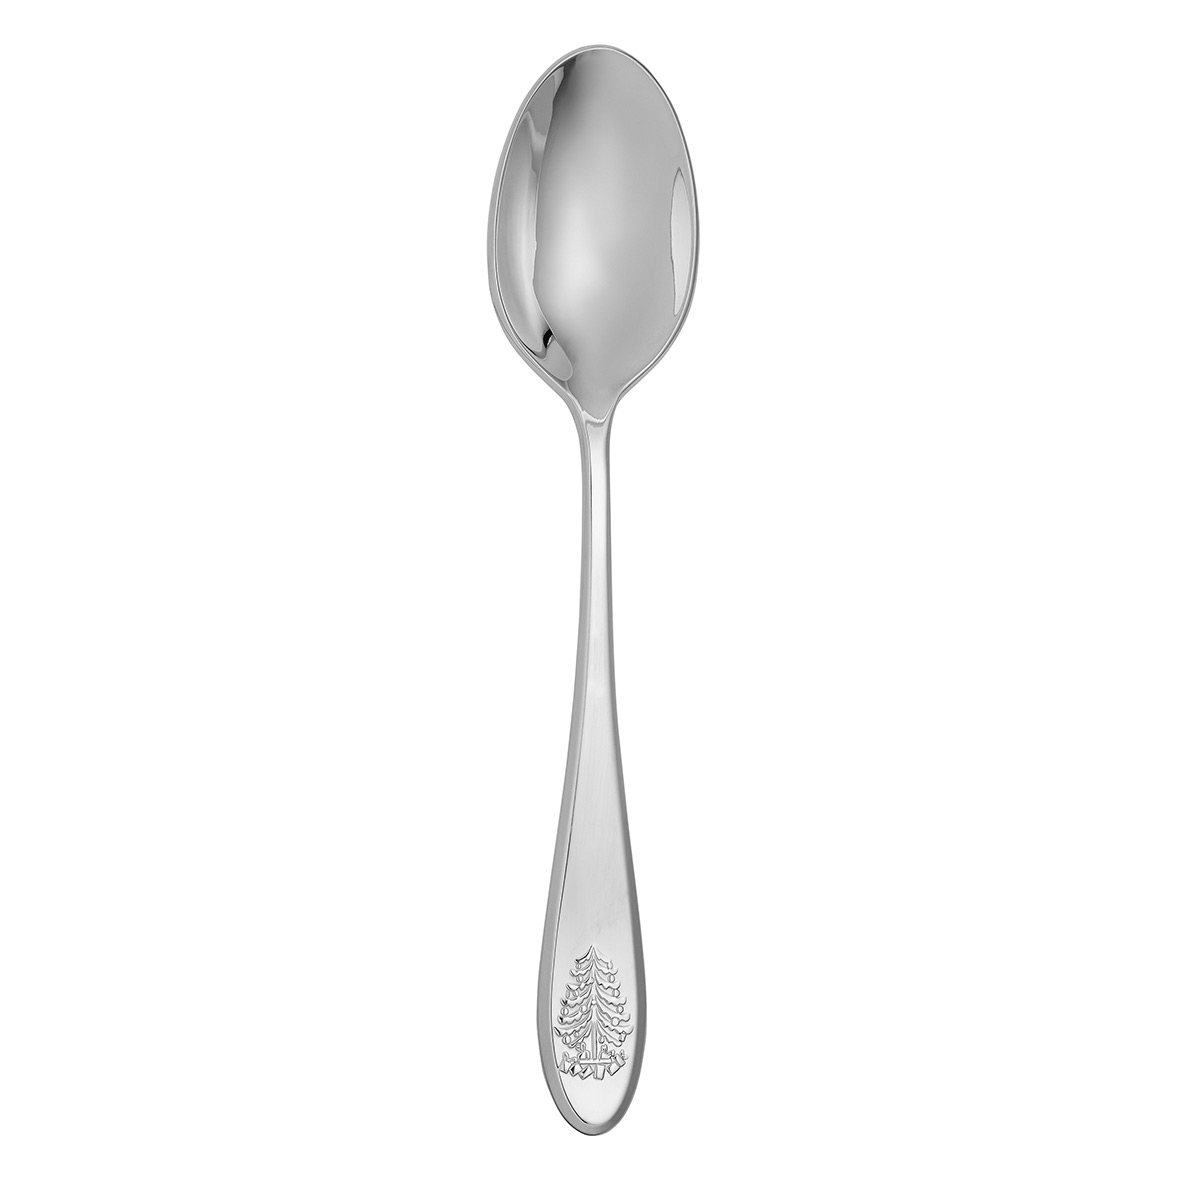 Spode Christmas Tree Cutlery Serving Spoon, Stainless